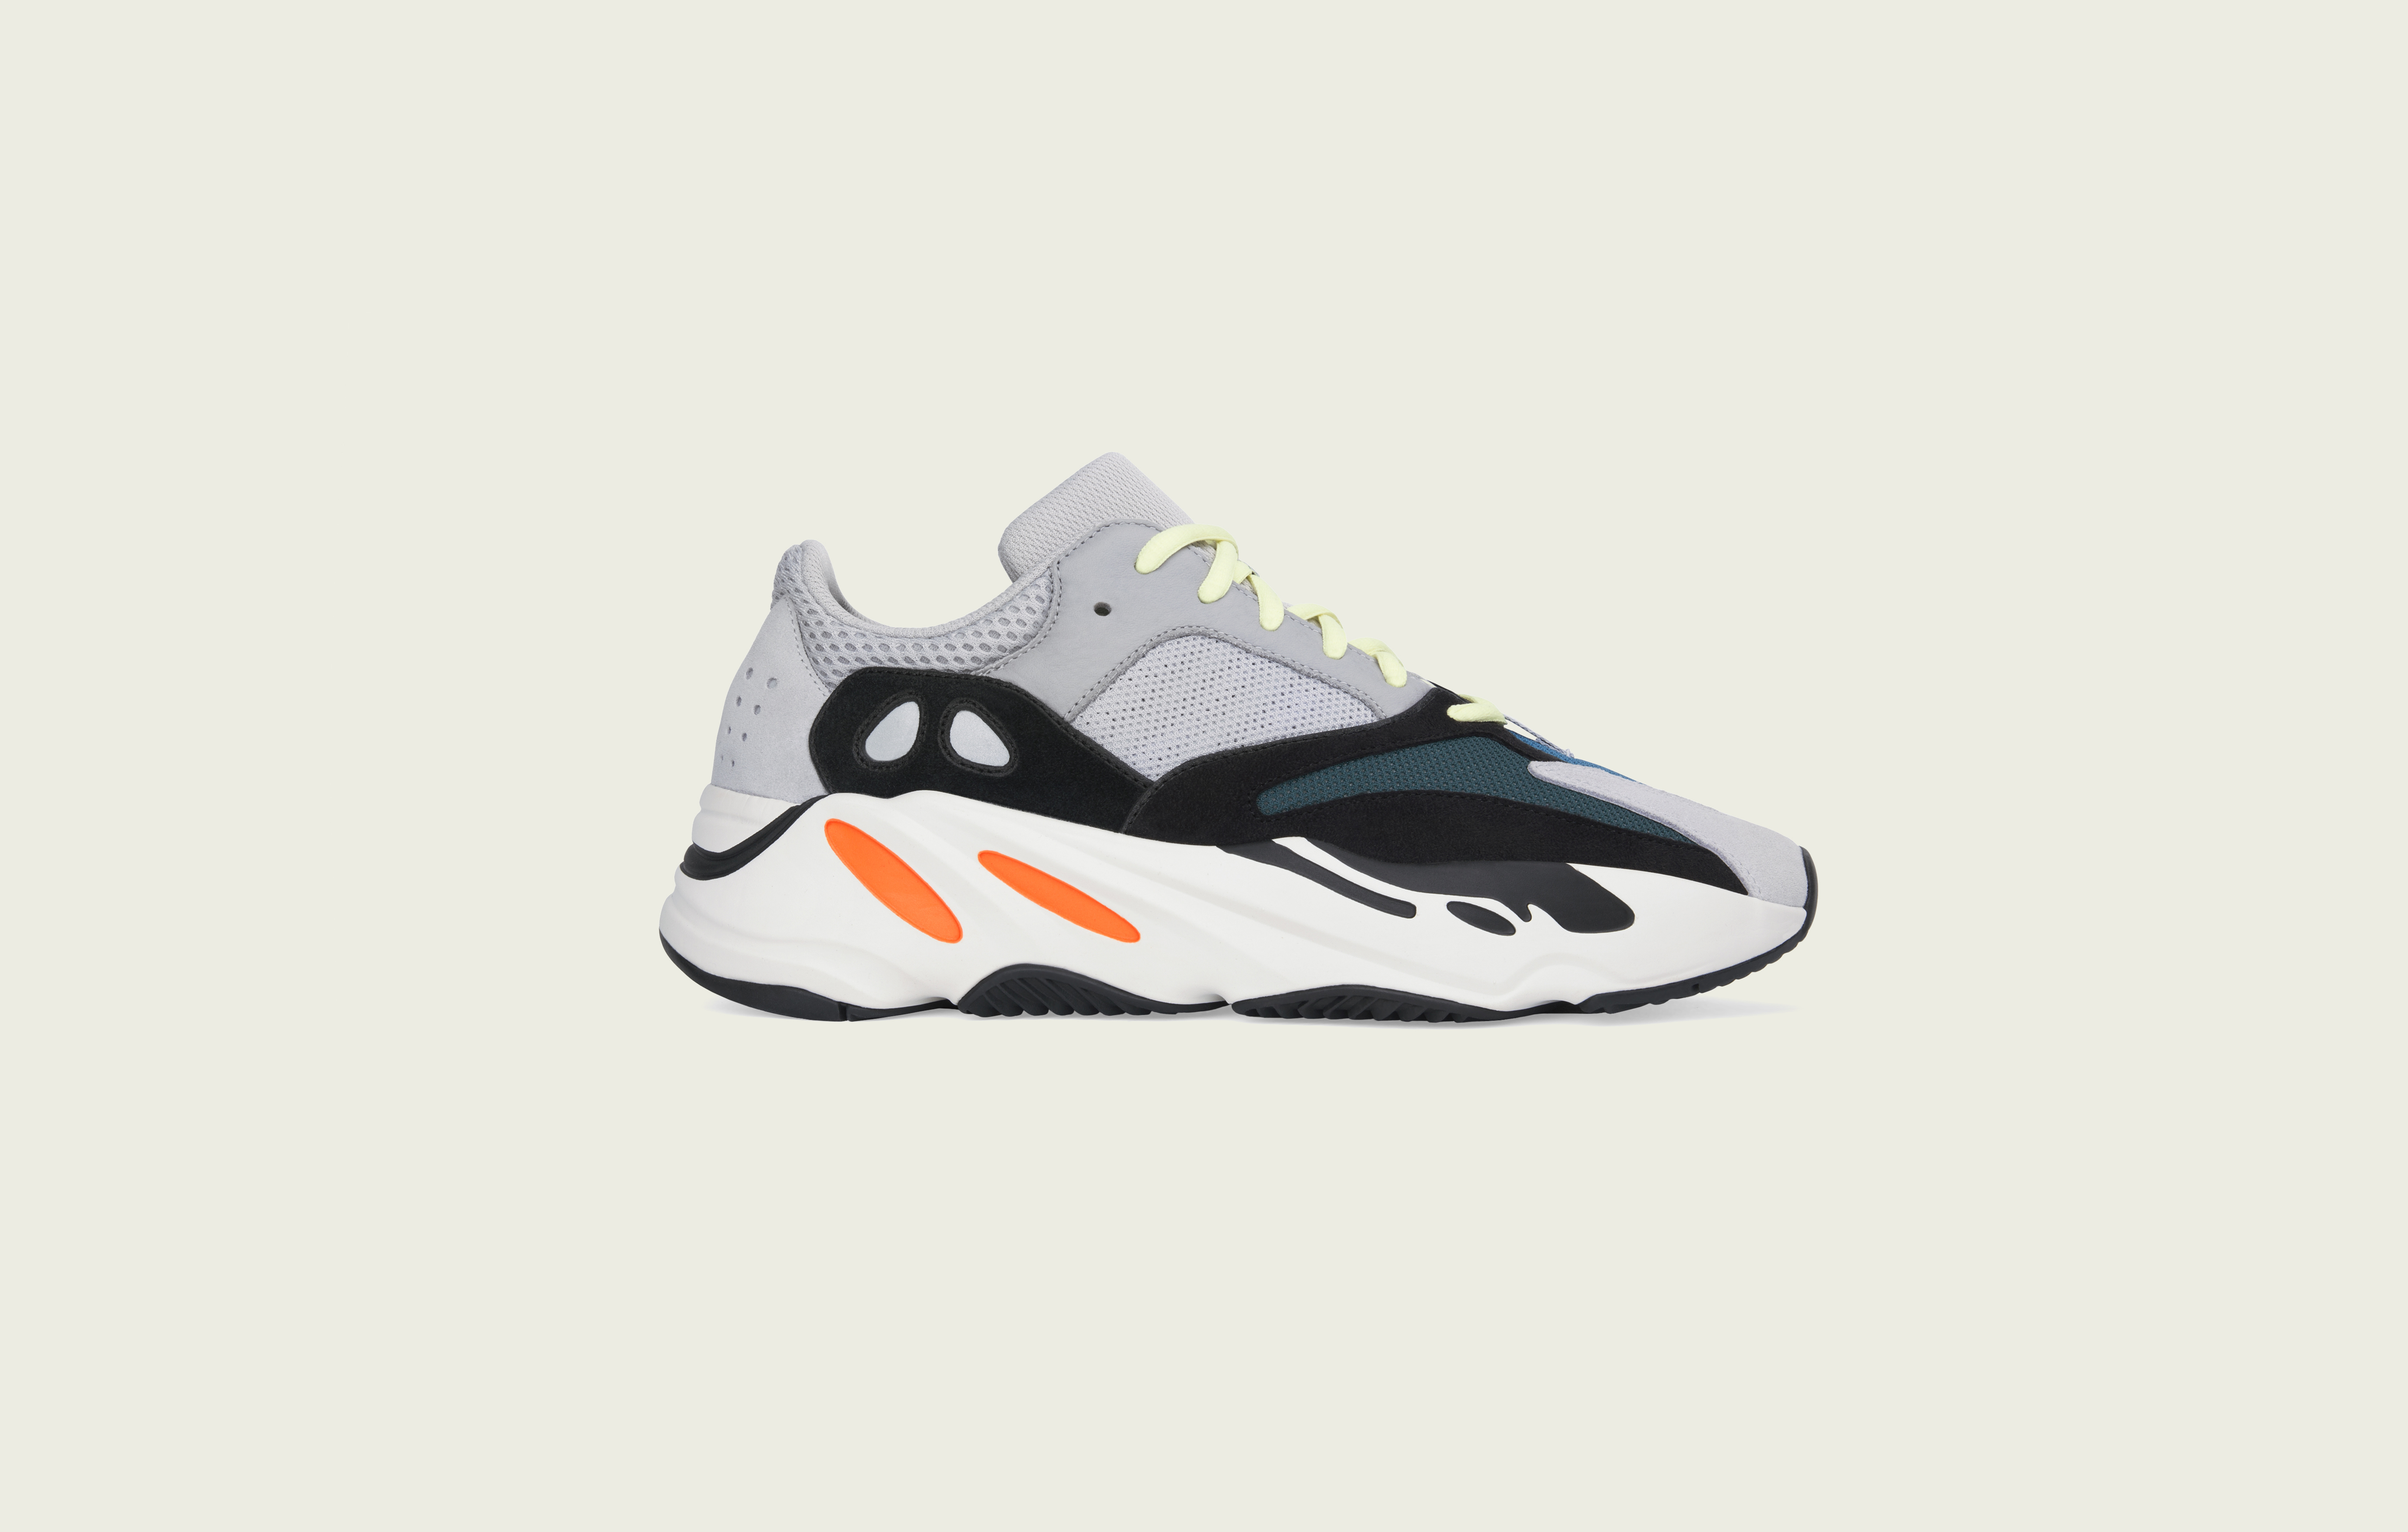 Adidas Yeezy Boost 700 &#x27;Wave Runner&#x27; B75571 (Lateral)